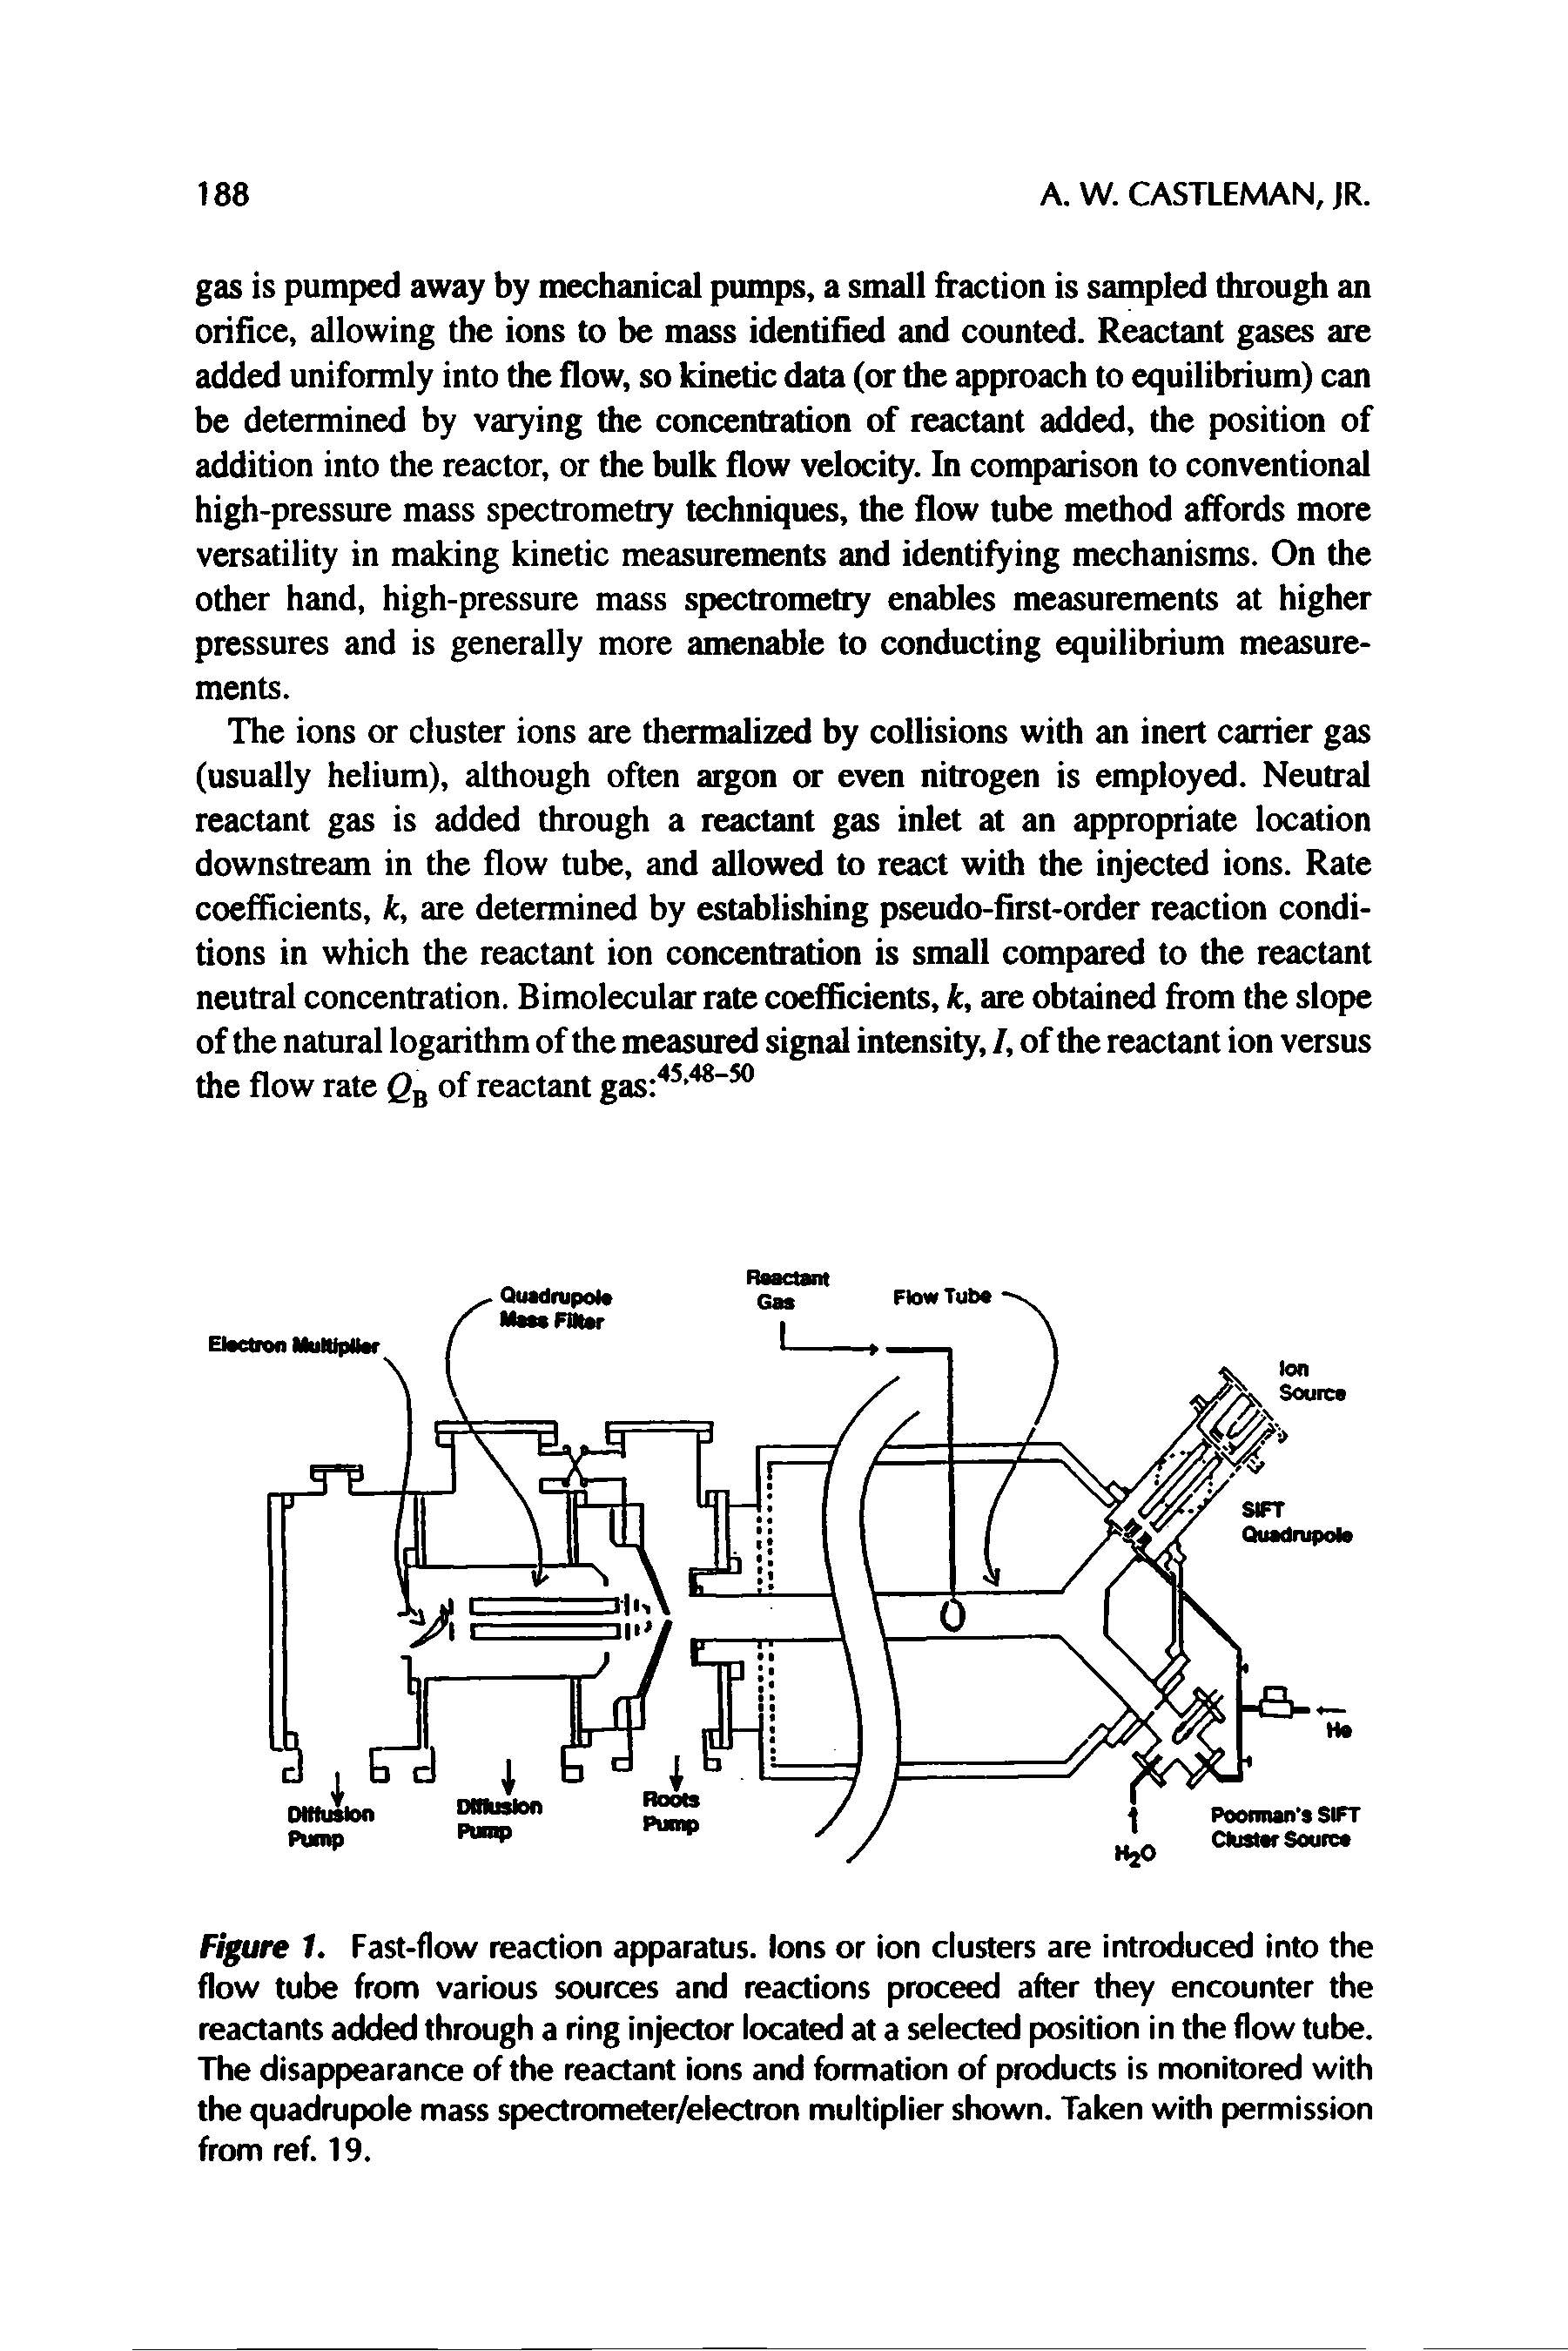 Figure 1. Fast-flow reaction apparatus. Ions or ion clusters are introduced into the flow tube from various sources and reactions proceed after they encounter the reactants added through a ring injector located at a selected position in the flow tube. The disappearance of the reactant ions and formation of products is monitored with the quadrupole mass spectrometer/electron multiplier shown. Taken with permission from ref. 19.